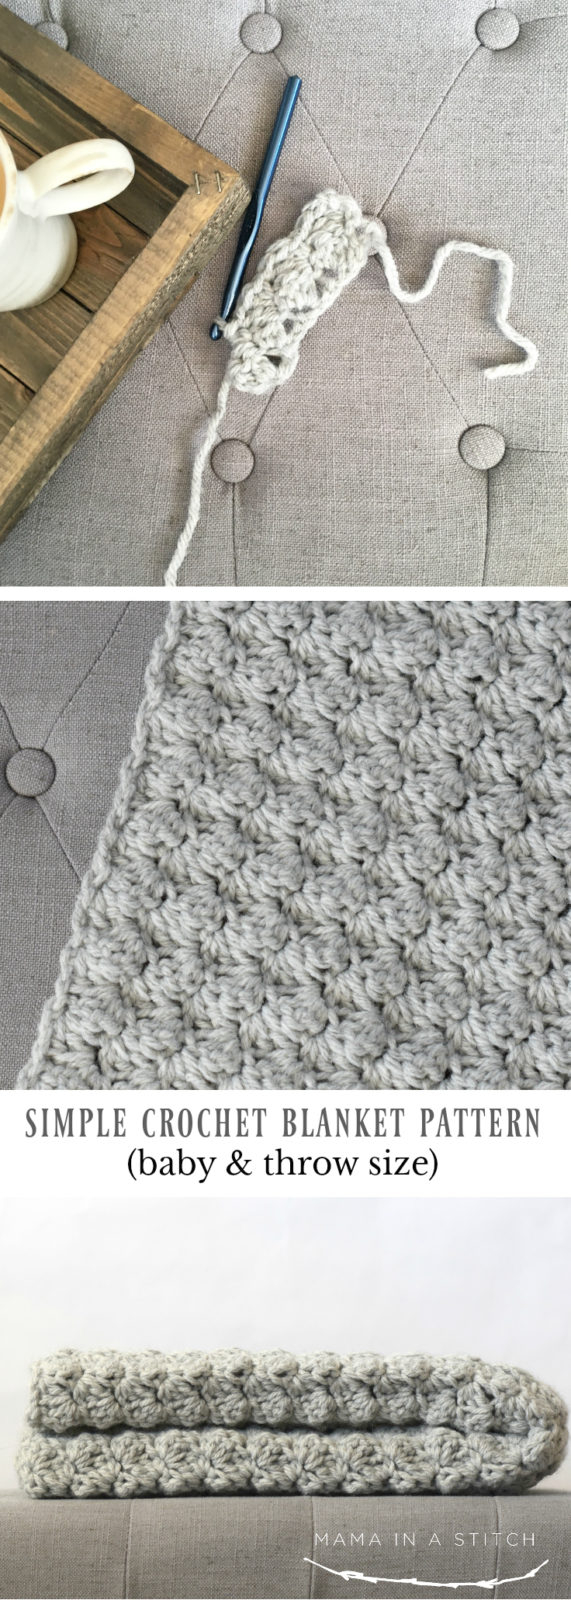 Beginner Crochet Patterns Free Simple Crocheted Blanket Go To Pattern Mama In A Stitch